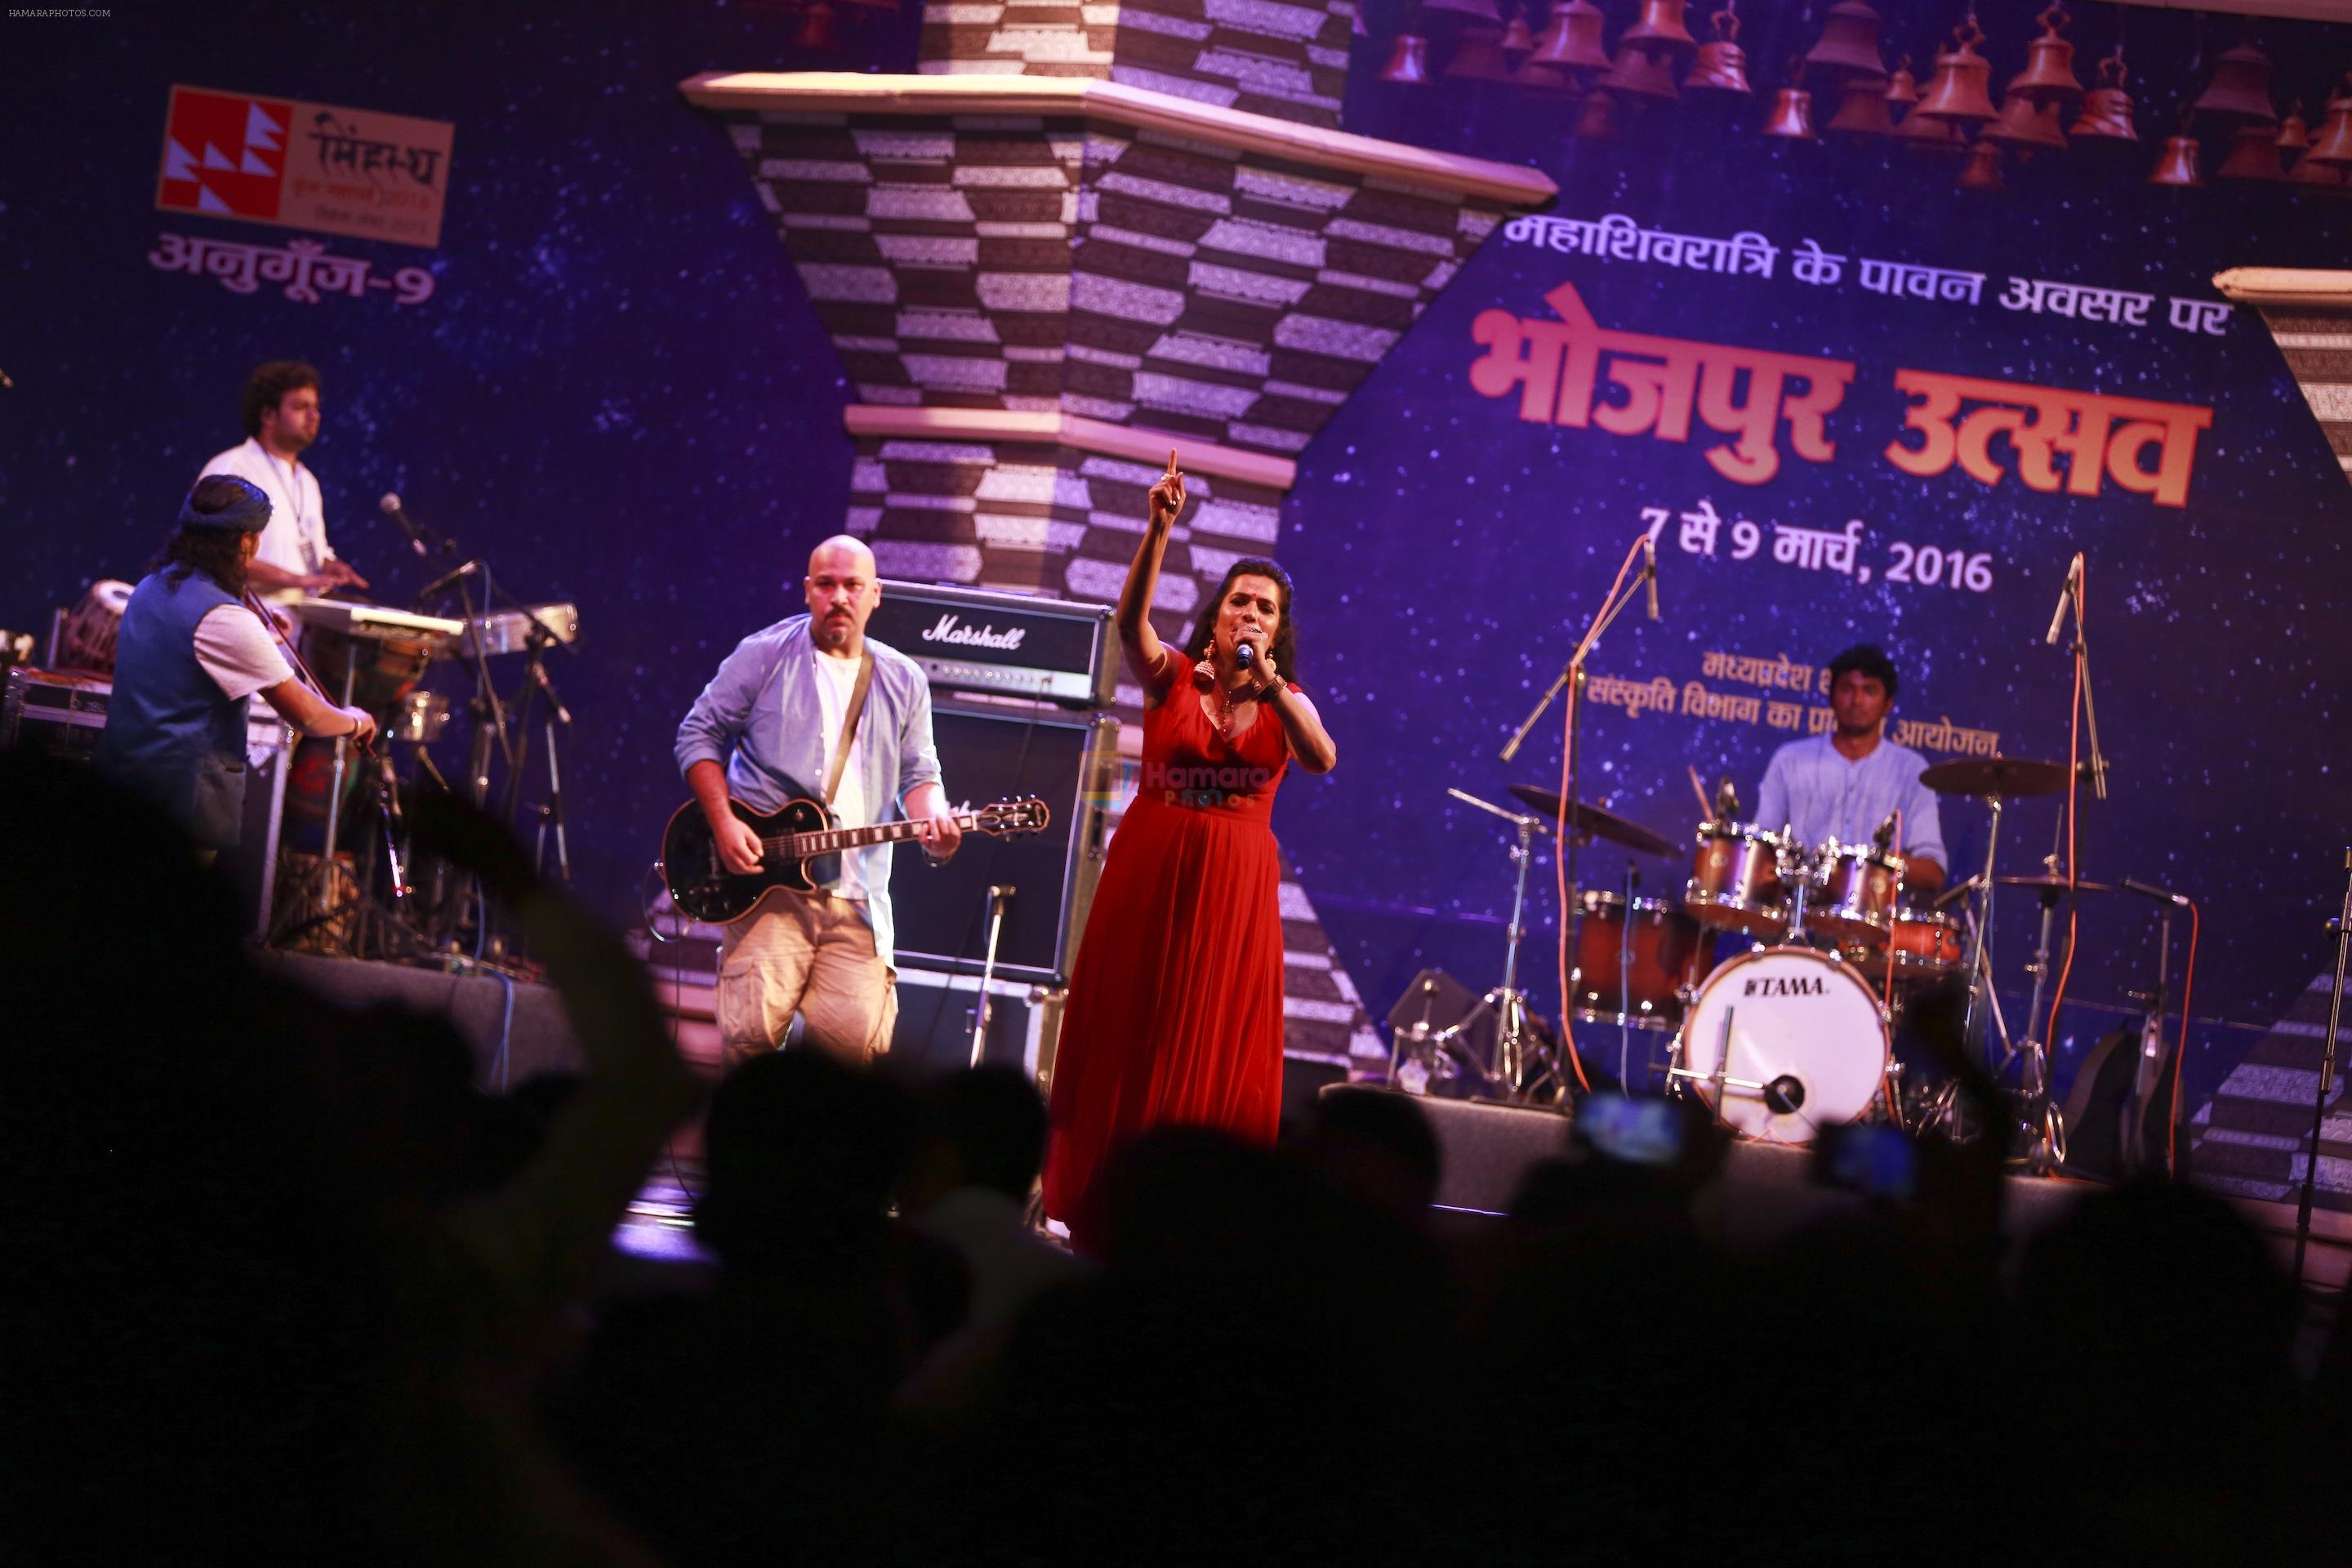 Sona Mohapatra Live on Maha Shivratri at the 11th Century BHOPAL Bhojesvar Site on 10th March 2016